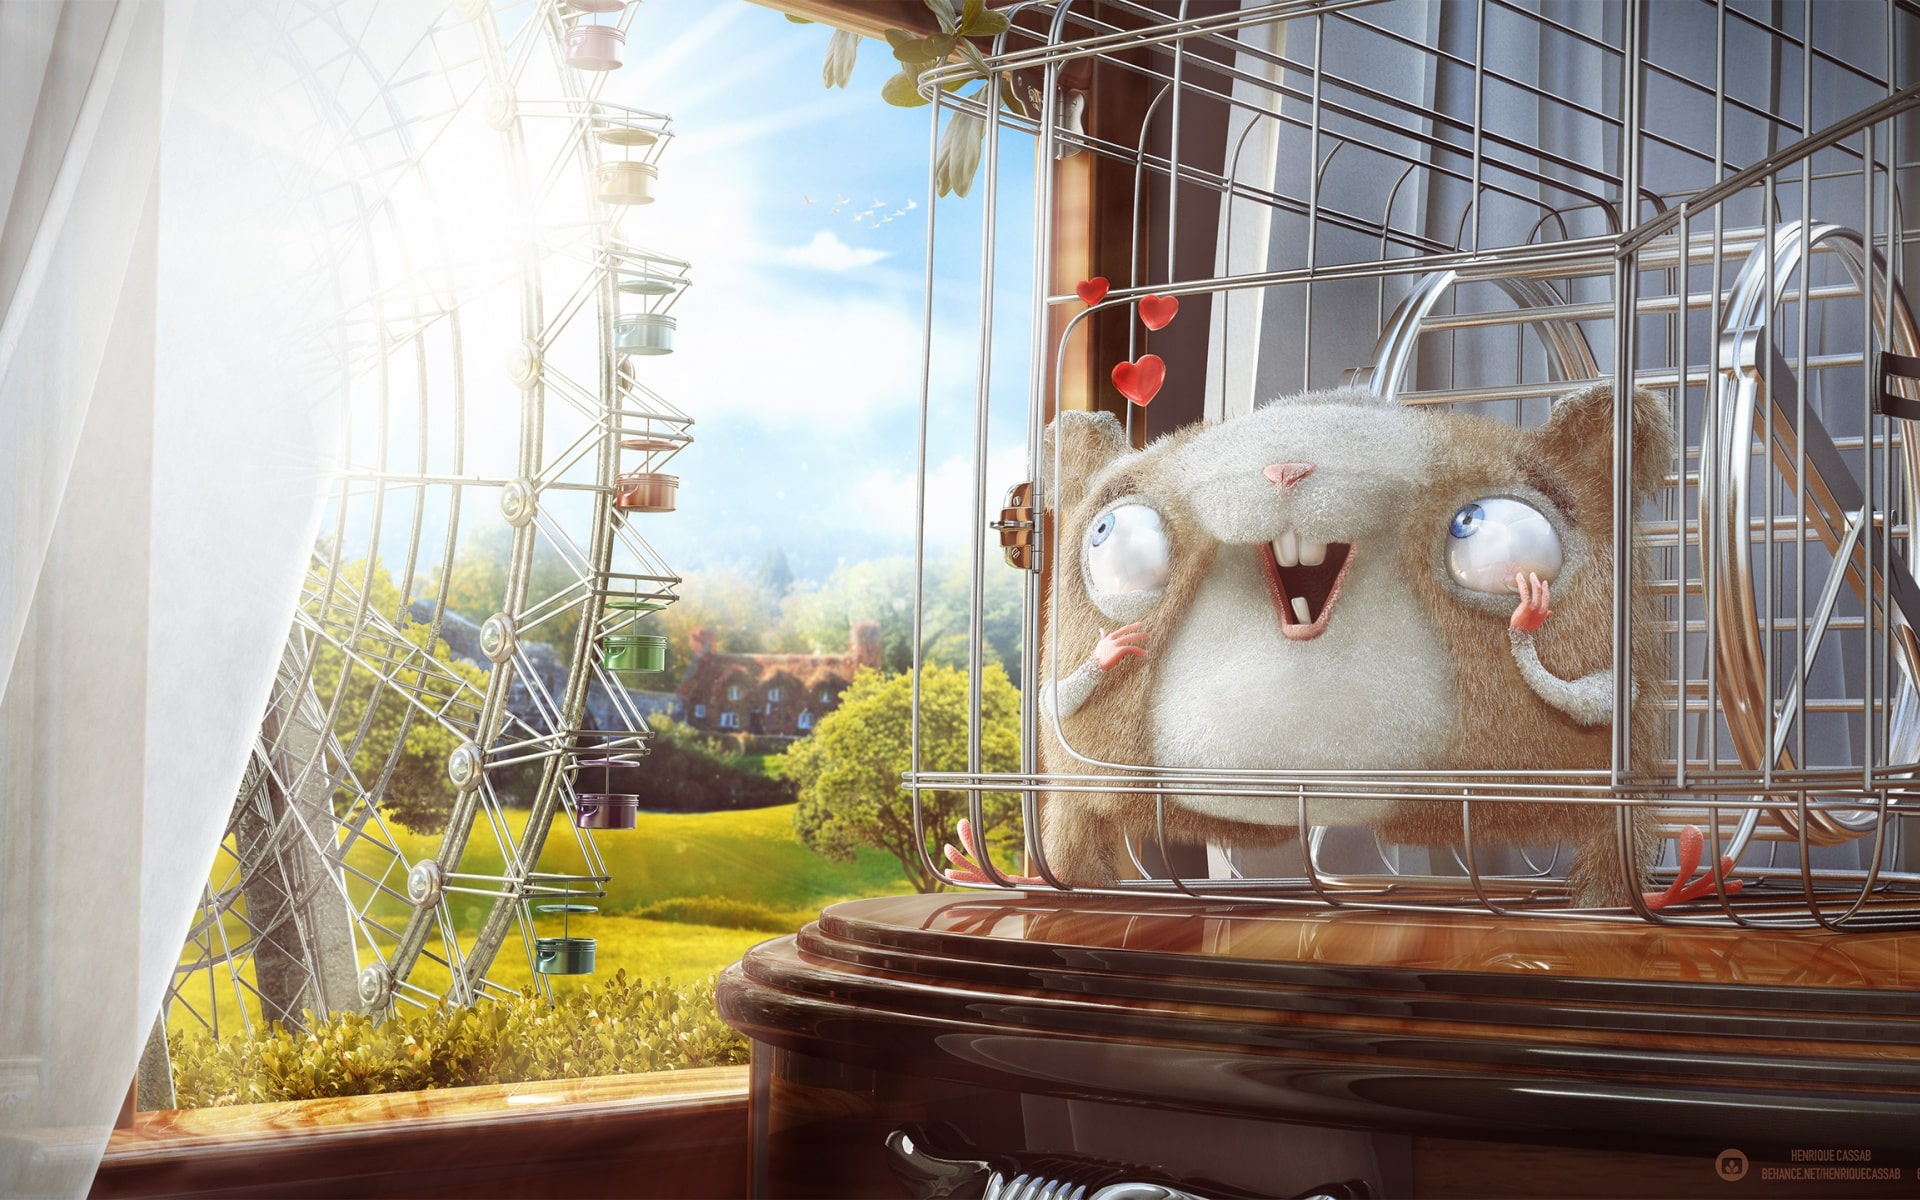 Cartoon image of a hamster in a cage looking out the window at a Ferris Wheel.